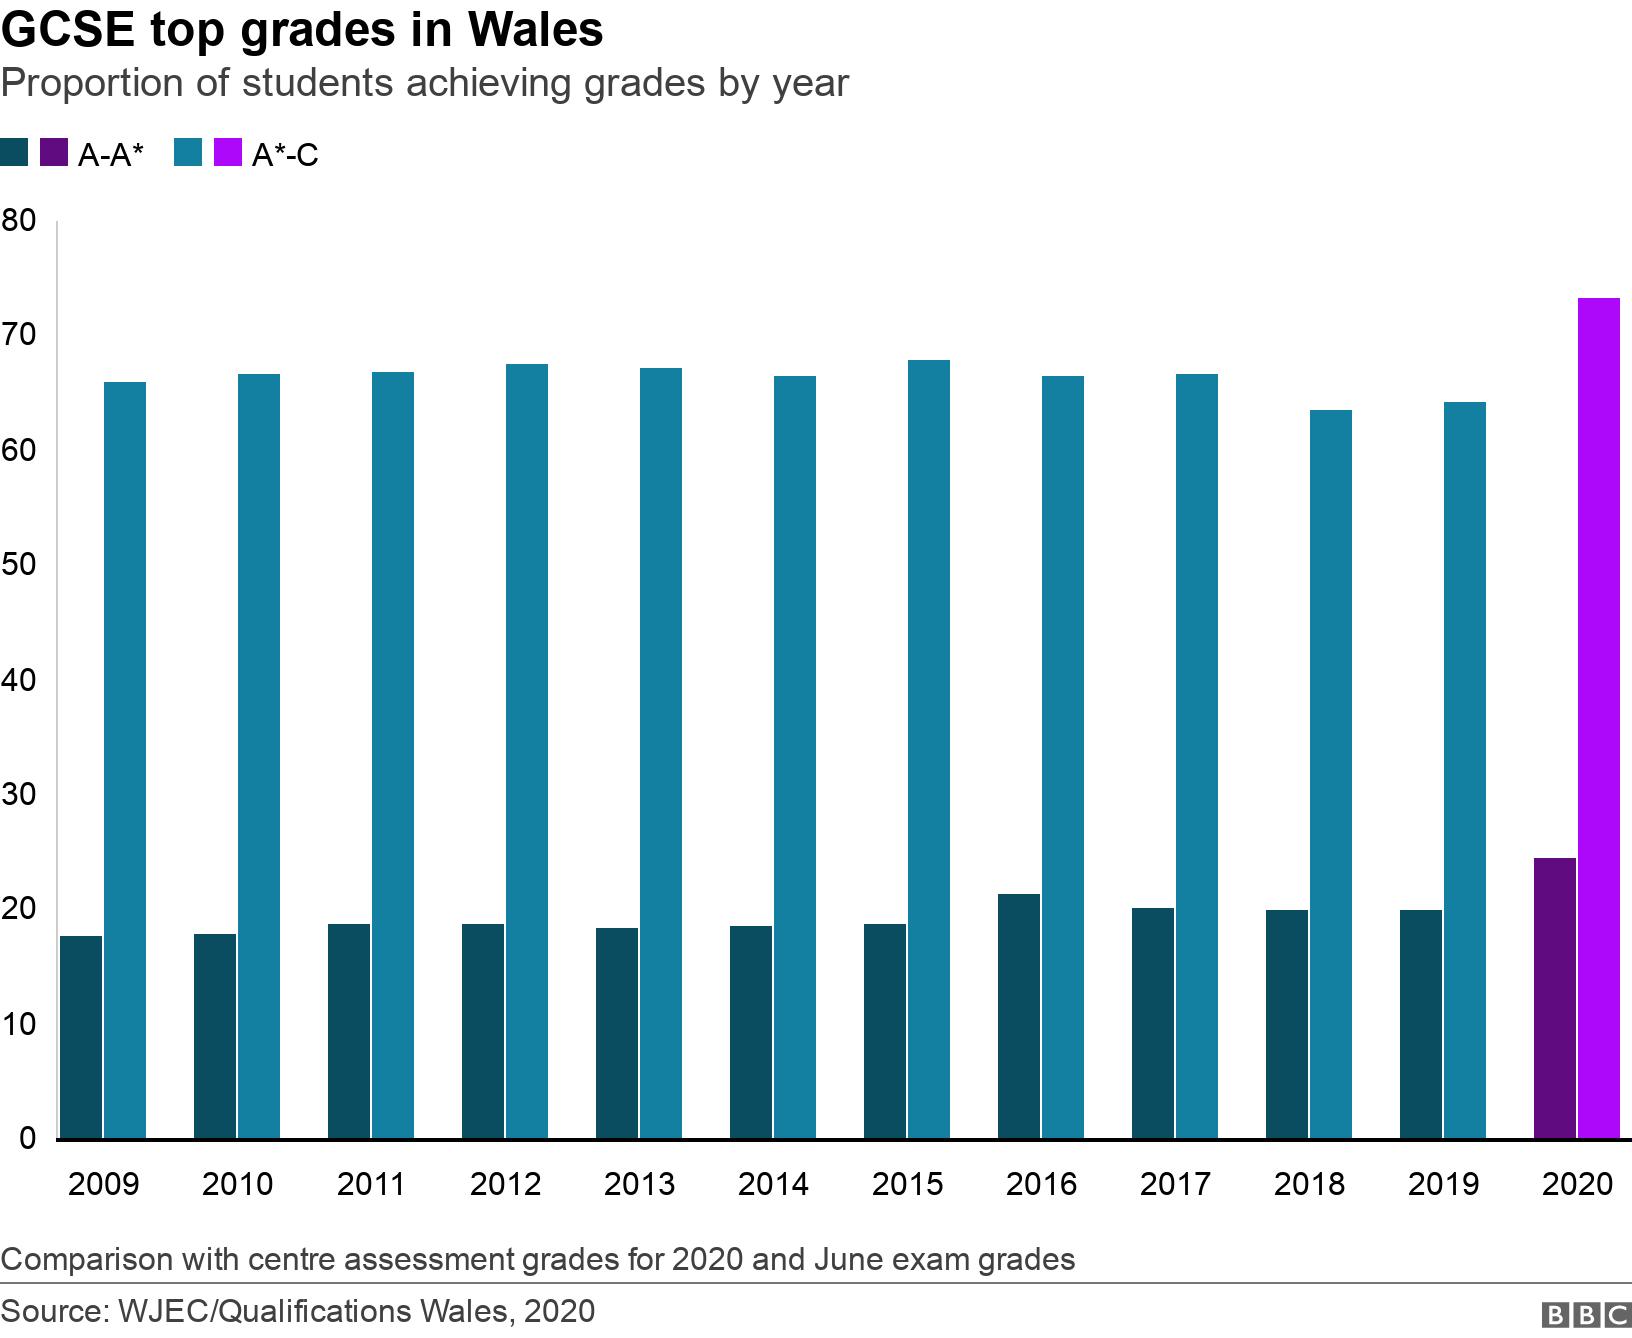 GCSE top grades in Wales. Proportion of students achieving grades by year.  Comparison with centre assessment grades for 2020 and June exam grades.